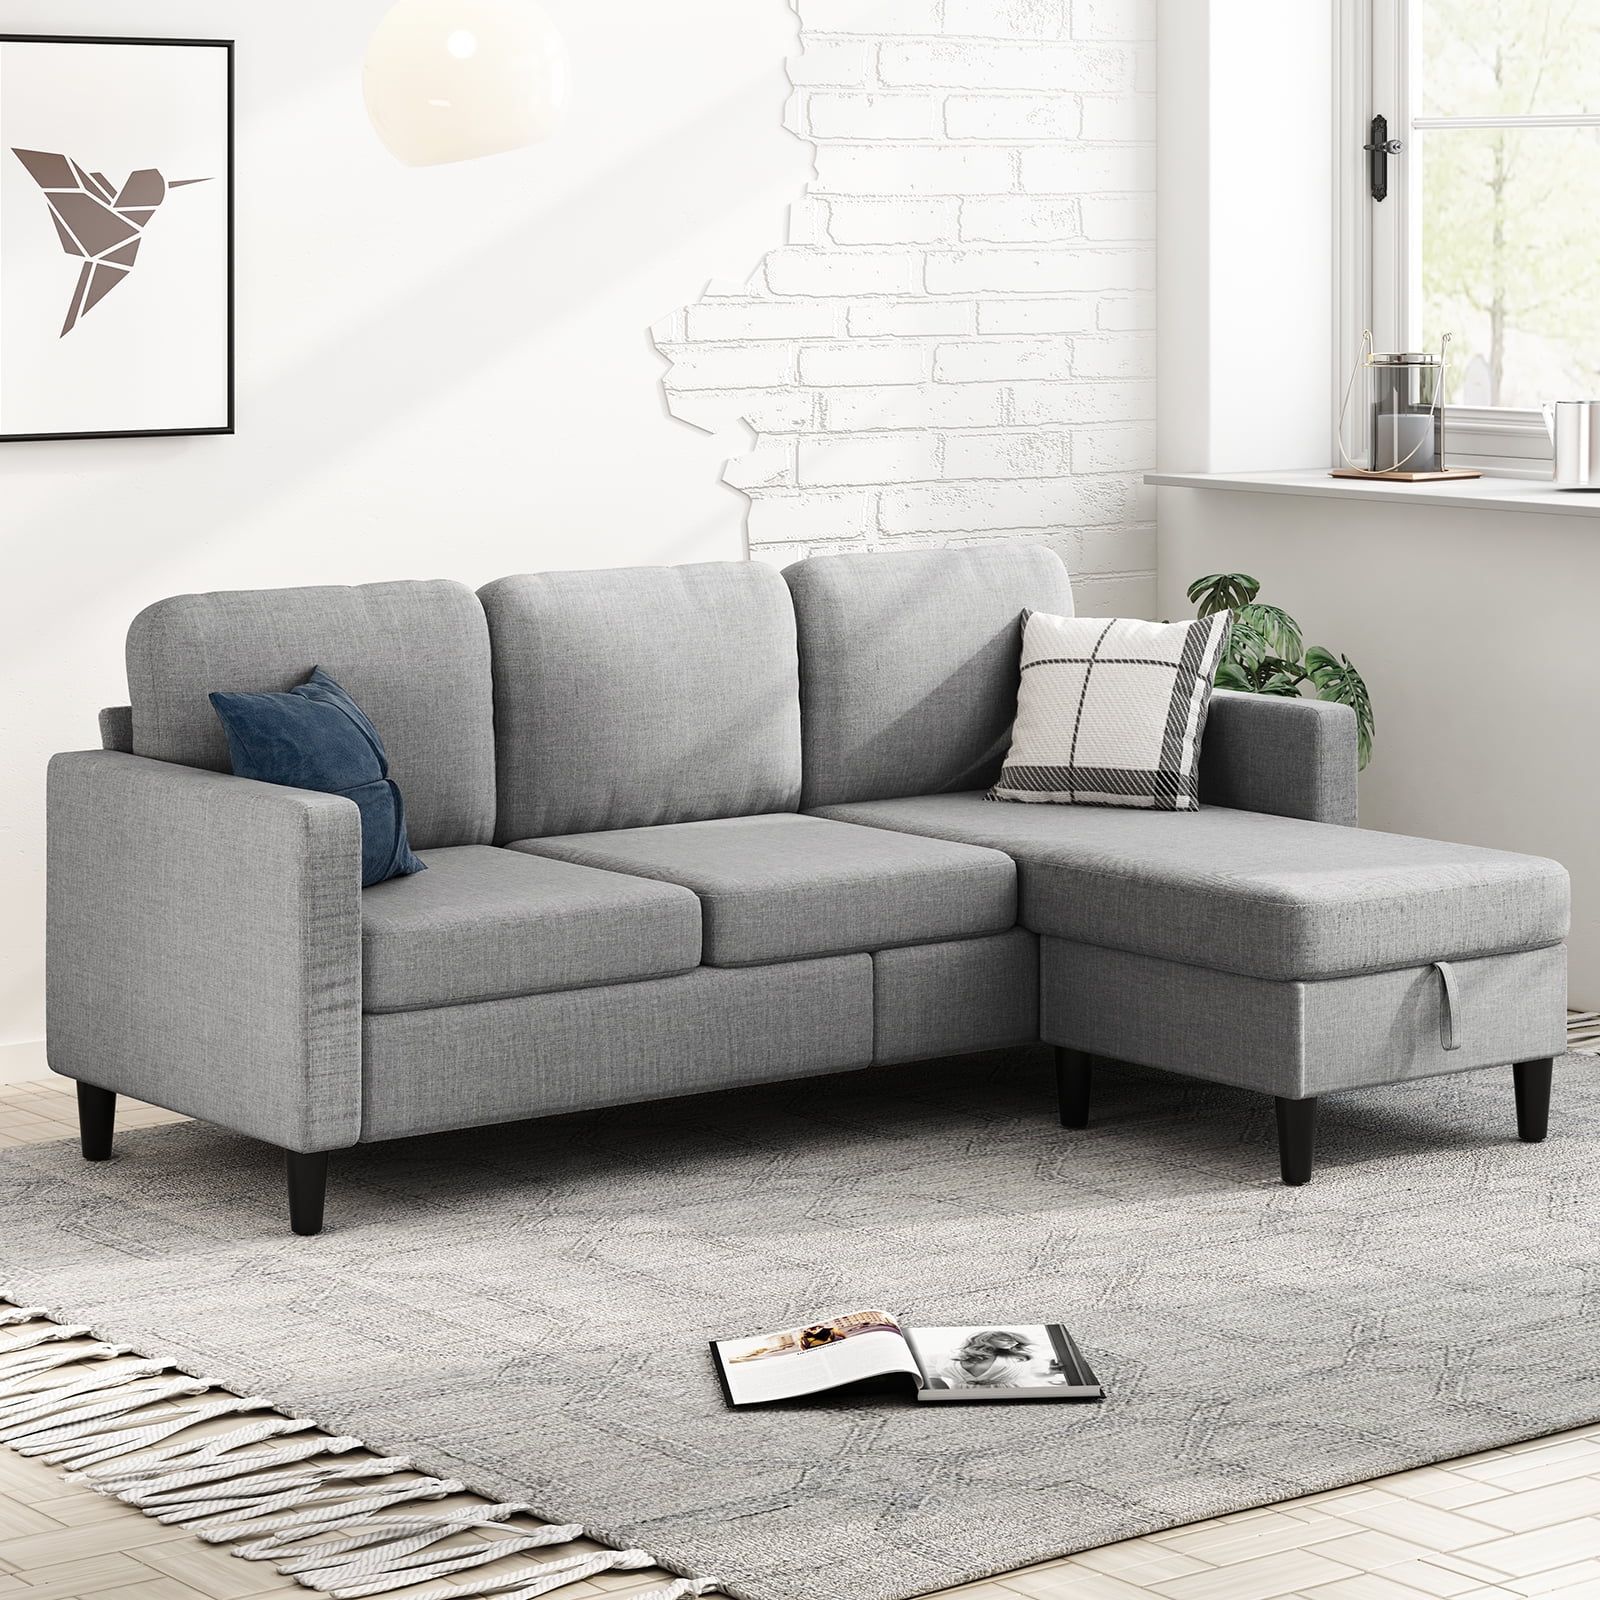 Muzz Sectional Sofa With Movable Ottoman, Free Combination Sectional Couch,  Small L Shaped Sectional Sofa With Storage Ottoman, Modern Linen Fabric Sofa  Set For Living Room (light Grey) – Walmart In Modern L Shaped Sofa Sectionals (View 9 of 13)